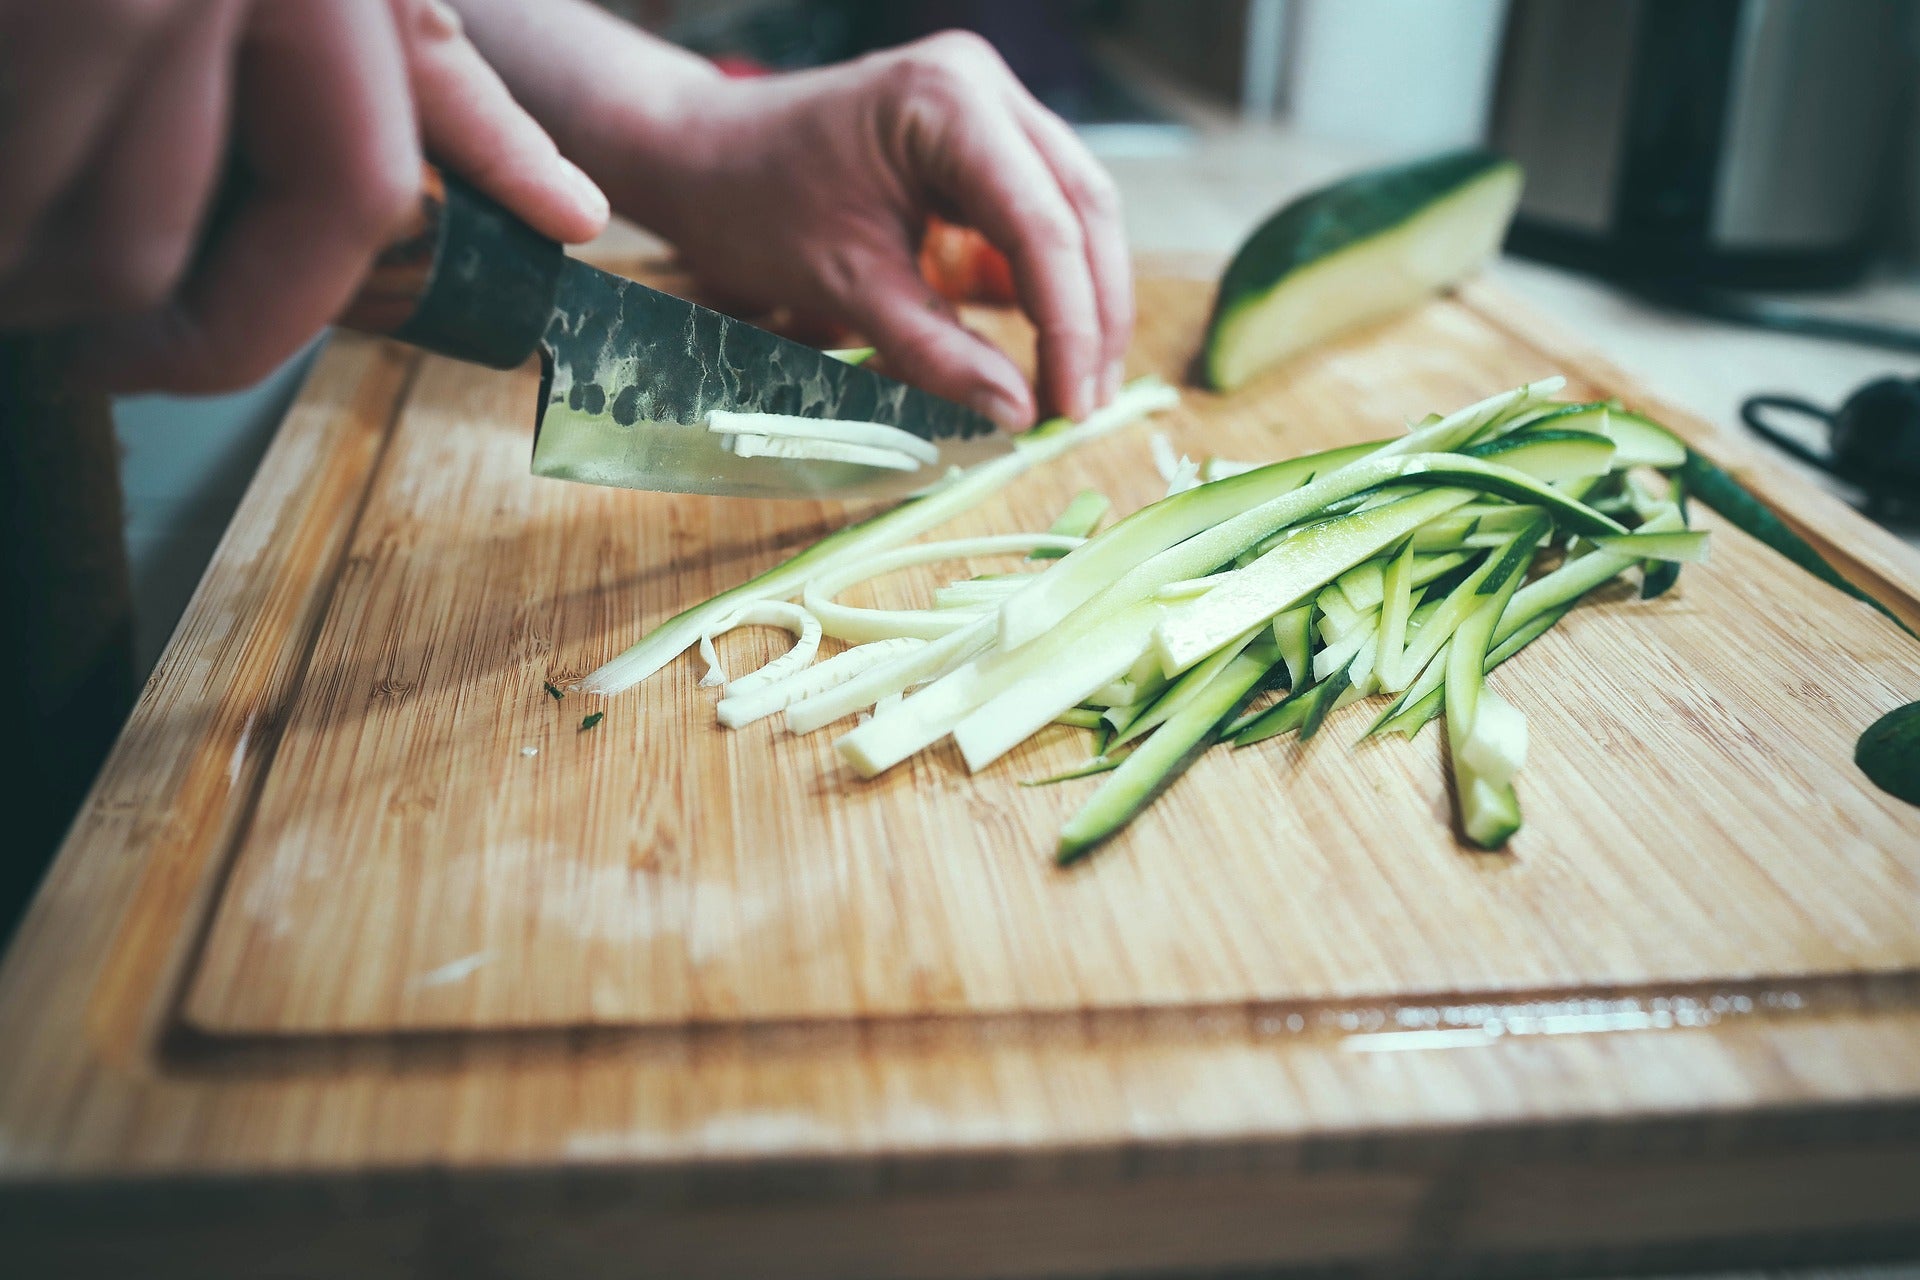 Bamboo Chopping Boards & How To Care For Them - Innoteck